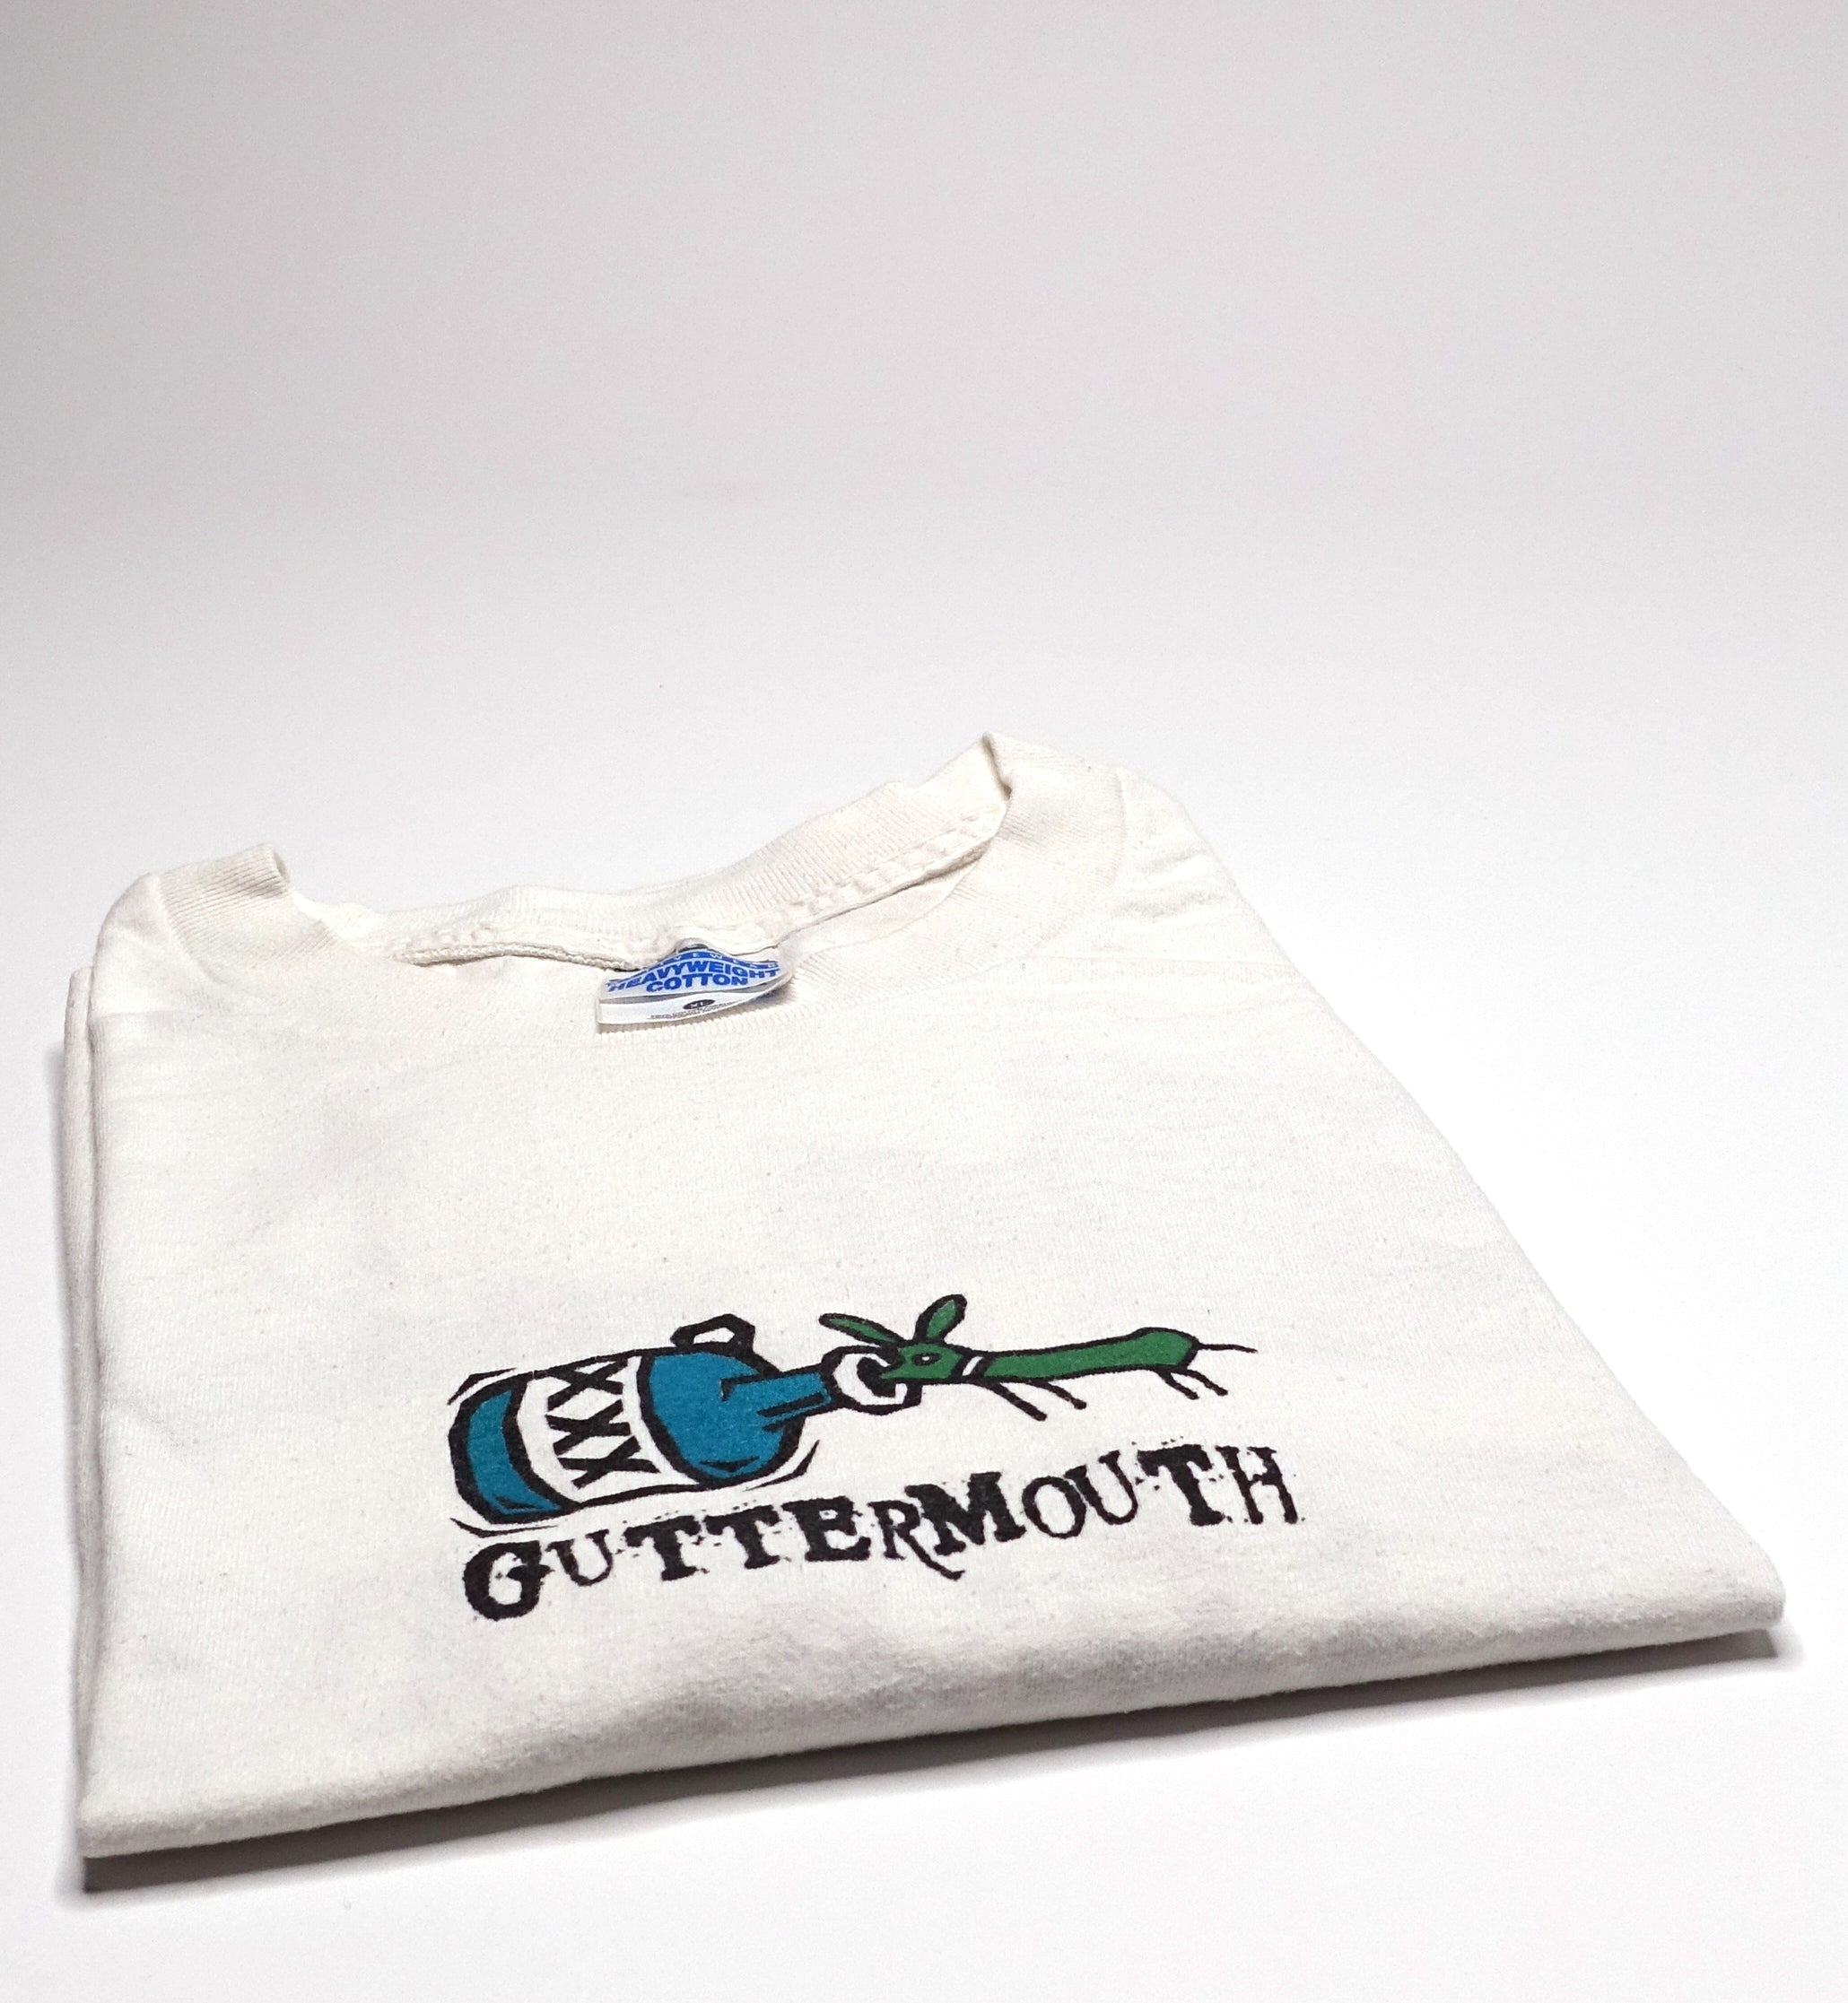 Guttermouth - Tequila Worm 90's Tour Shirt (White) Size XL